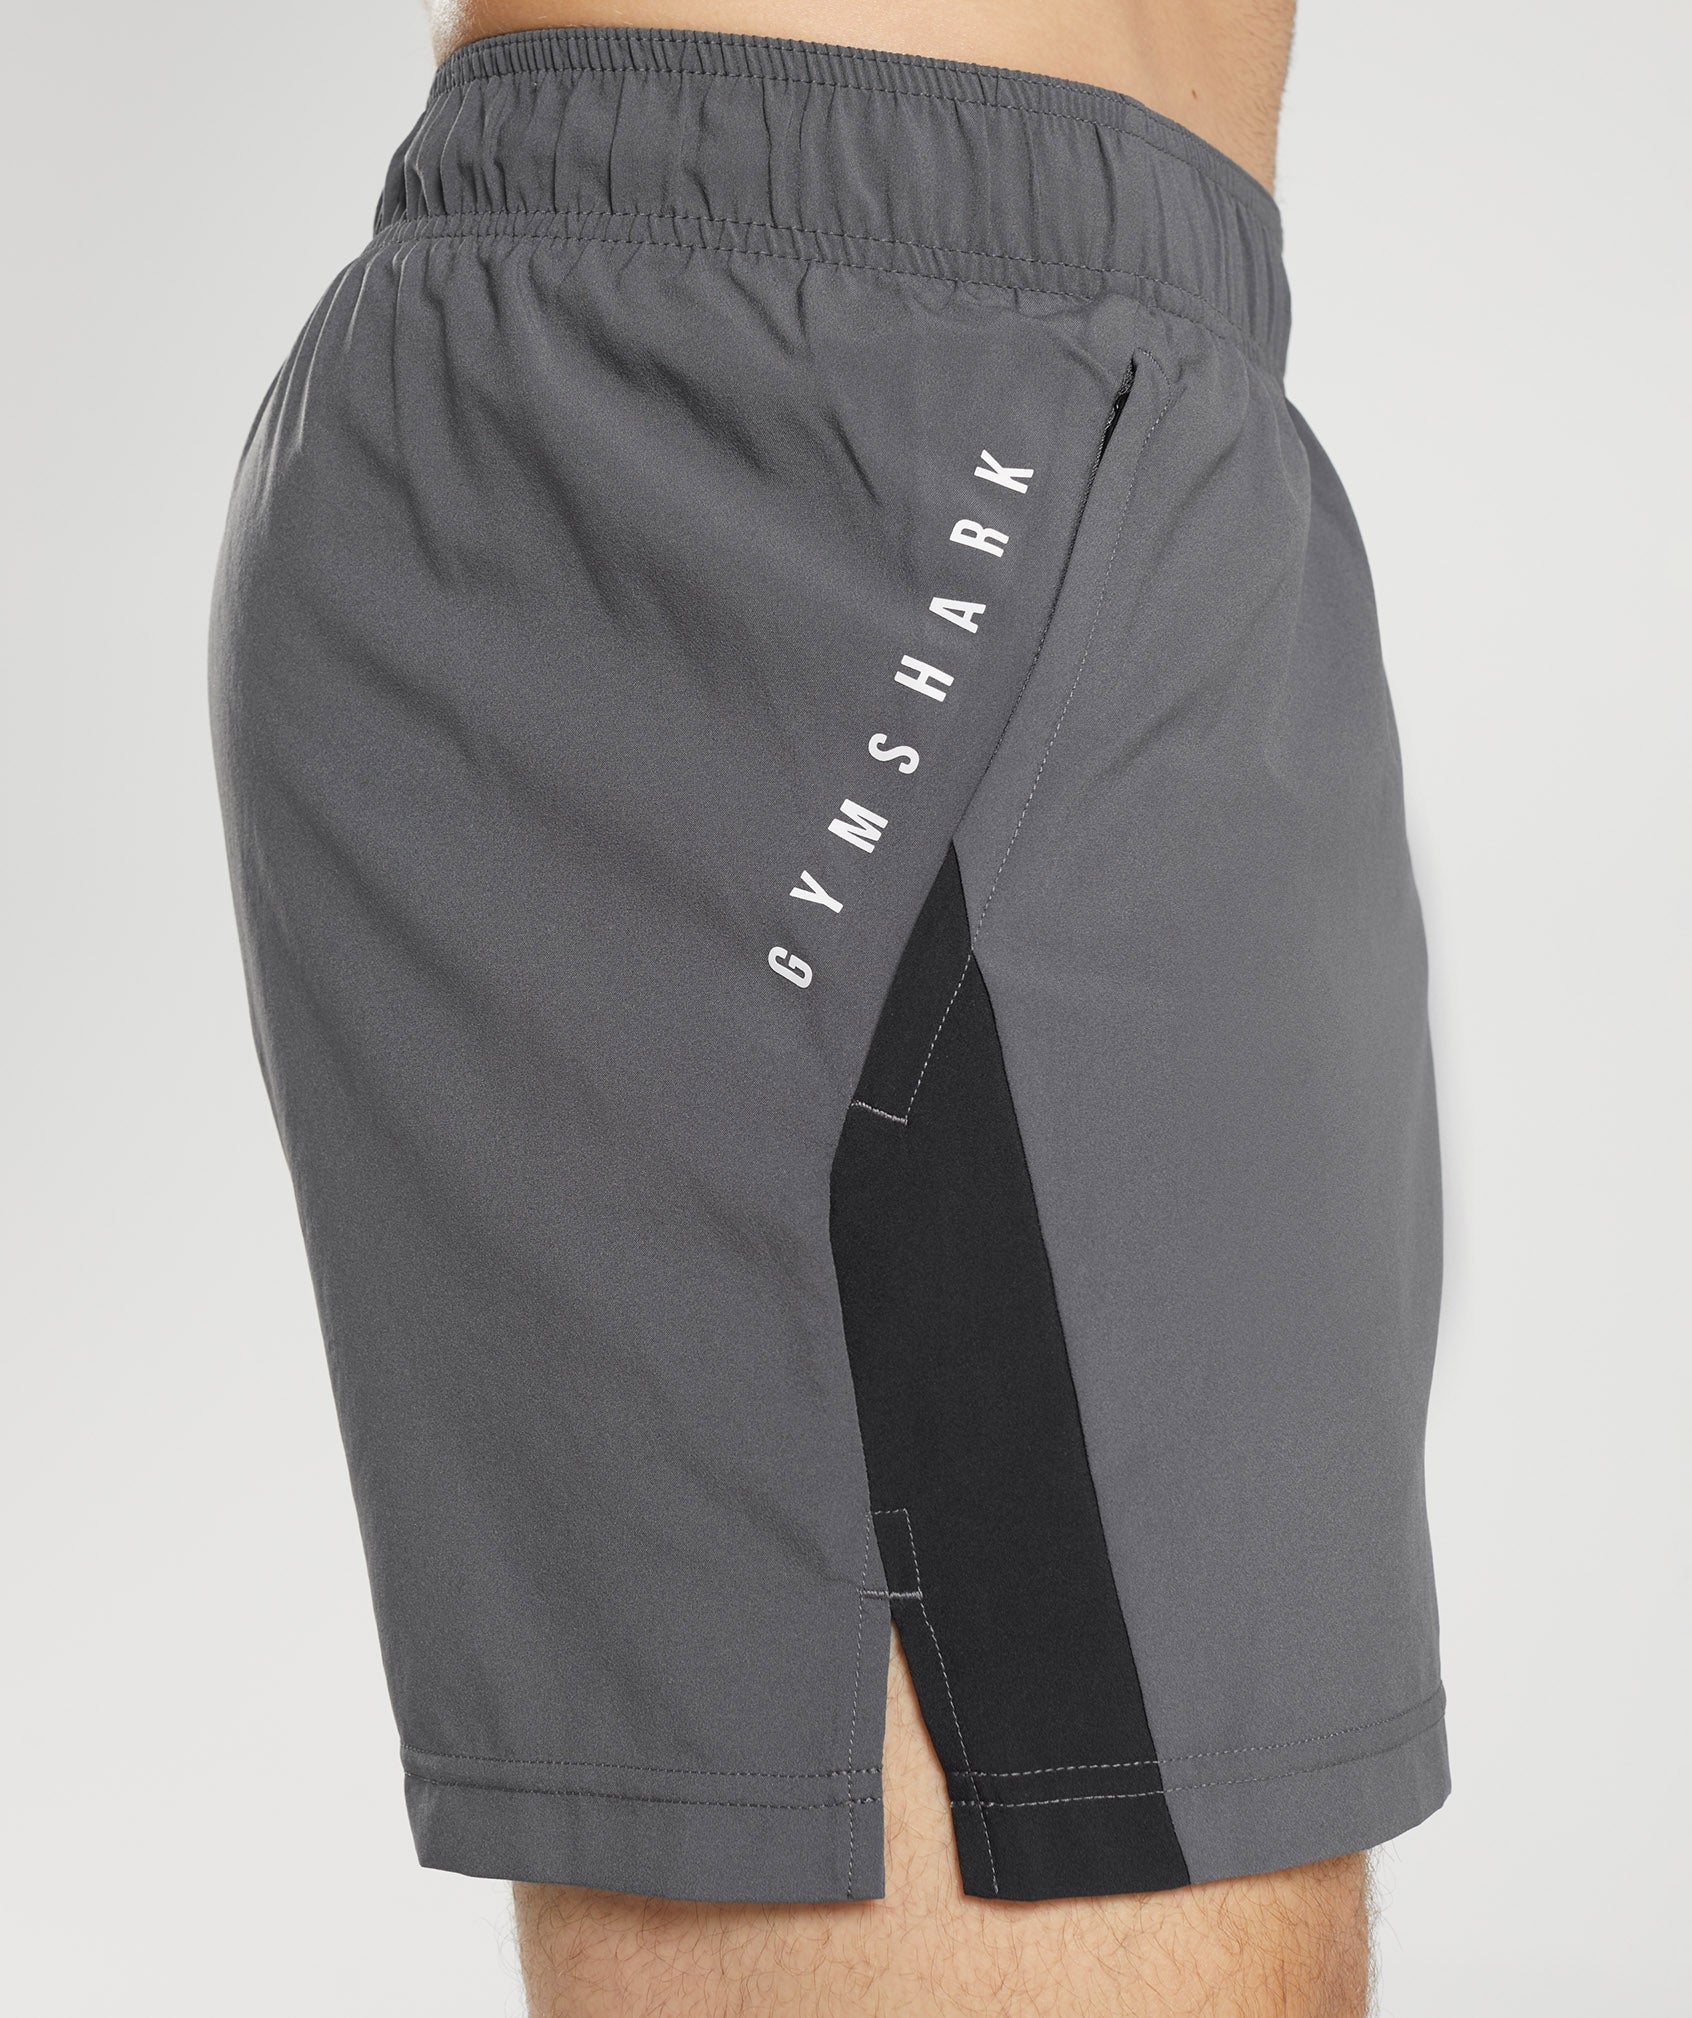 Sport 5" Shorts in Silhouette Grey/Black - view 5